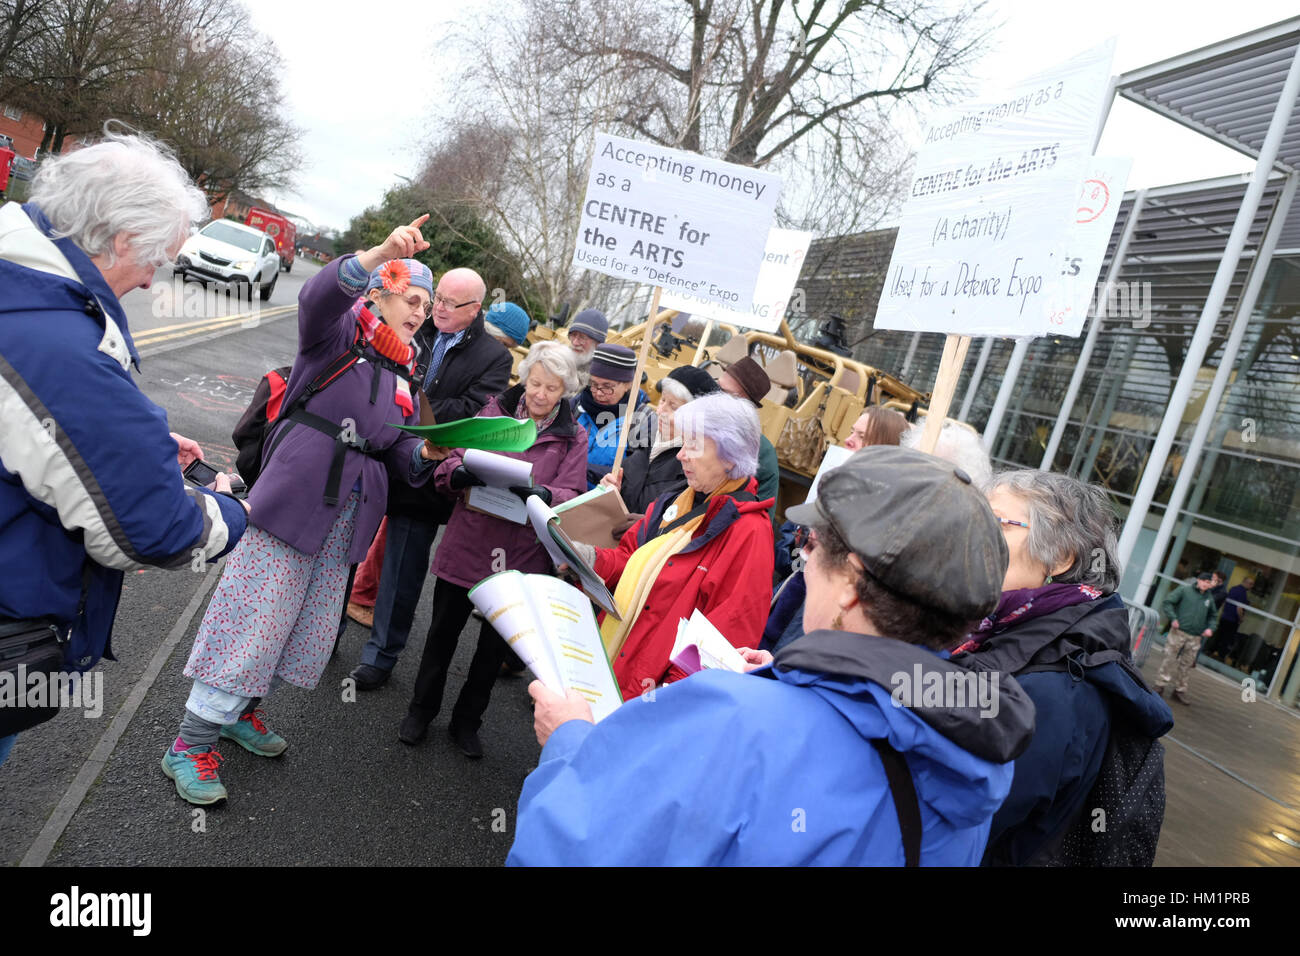 Hereford, UK. 1st February 2017. Protesters demonstrate outside the Herefordshire Defence and Security Expo ( HDSE ) event held at The Courtyard arts centre. The event features exhibitors and speakers from the defence industry among them QinetiQ, the Ministry of Defence and the Department of International Trade. The protesters included local Quakers and members of the Campaign Against Arms Trade ( CAAT ). Photograph Steven May / Alamy Live News Stock Photo